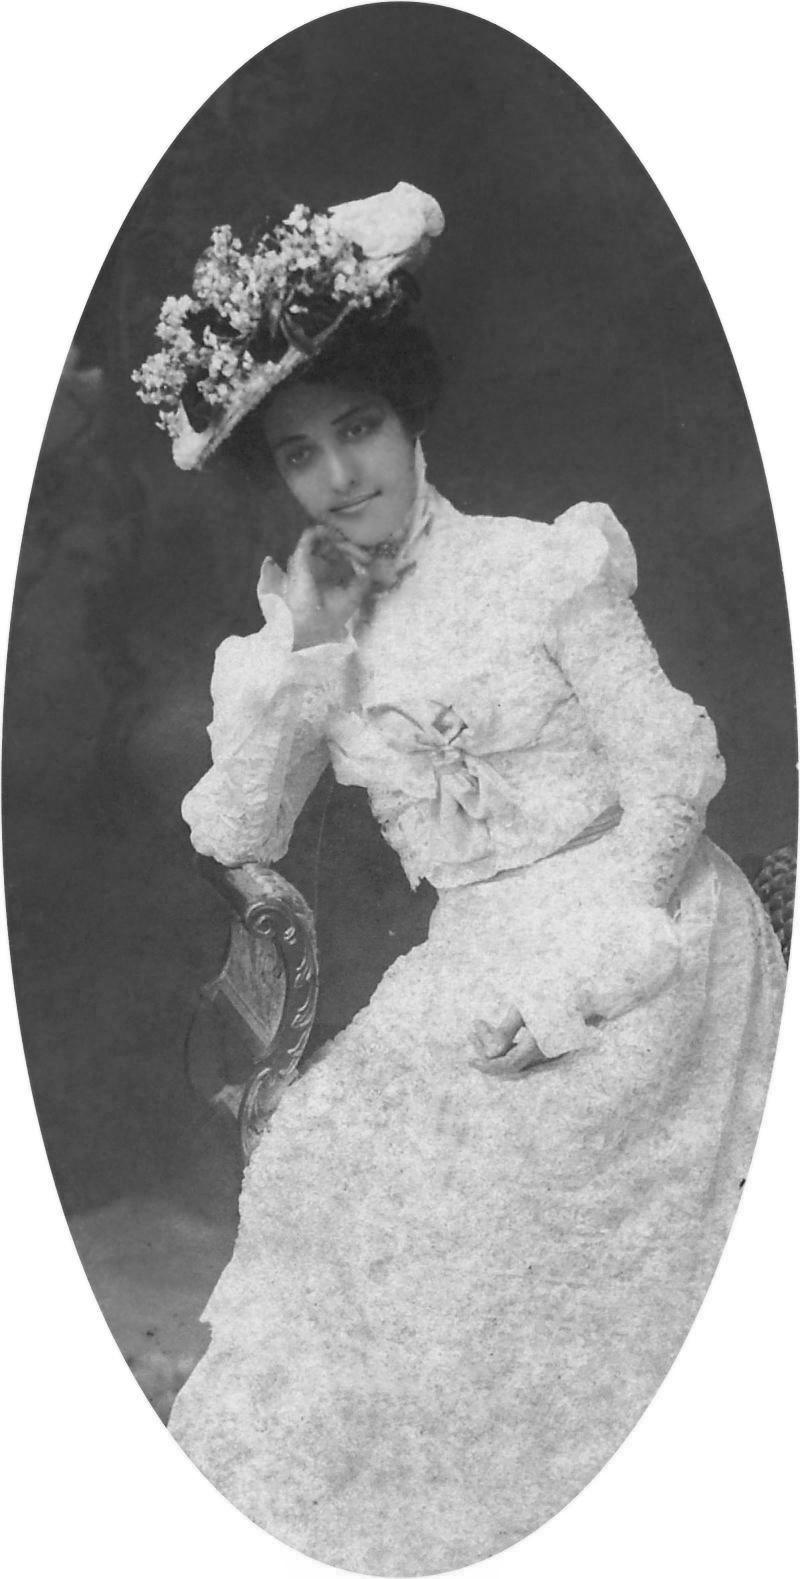 Kaiulani in white gown and hat, photograph by J. J. Williams